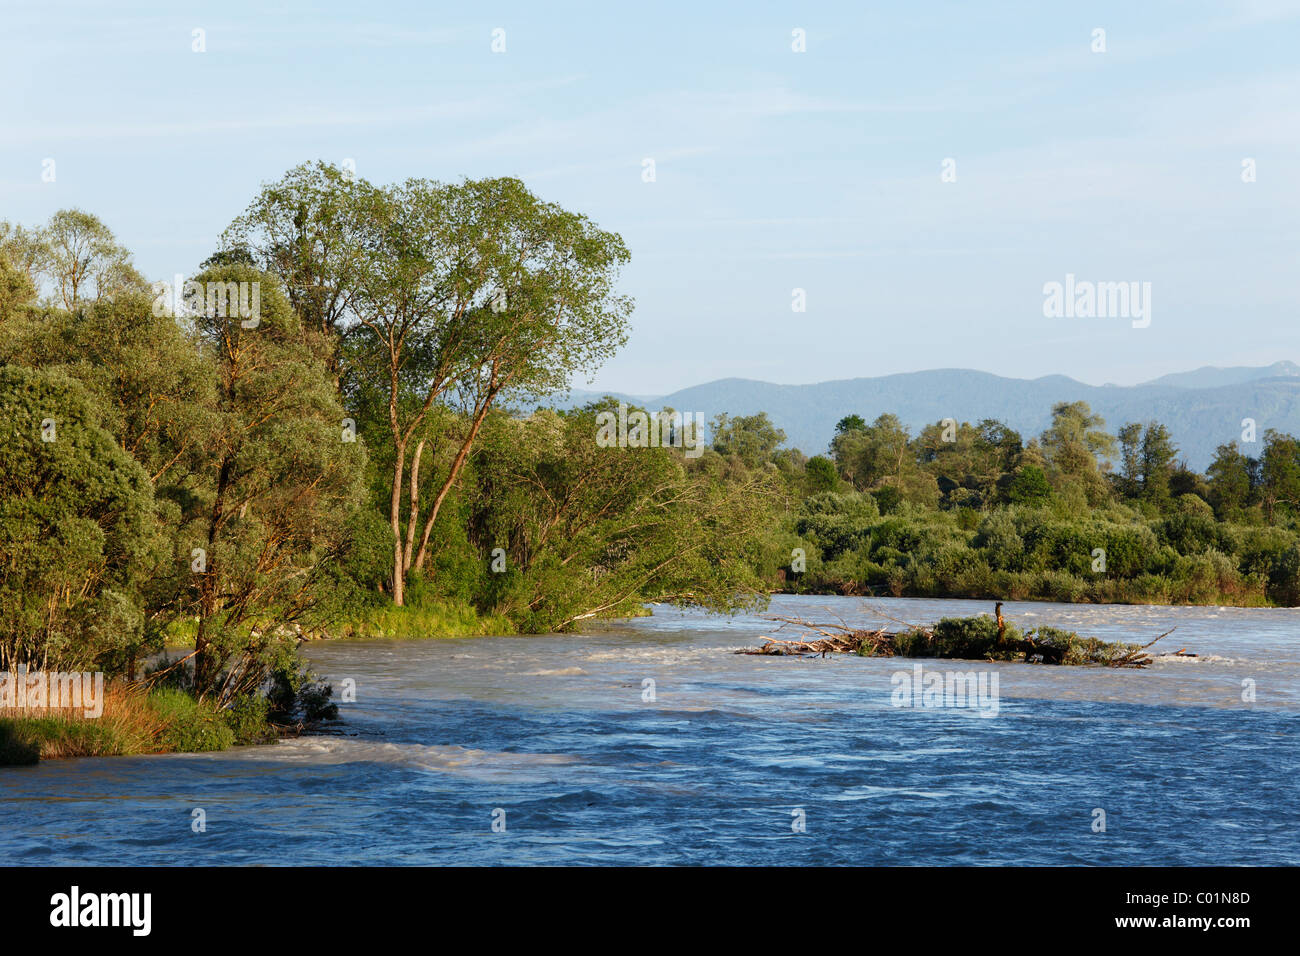 Floodwaters on the Isar river, Ascholding Au floodplains, Geretsried, Upper Bavaria, Germany, Europe Stock Photo